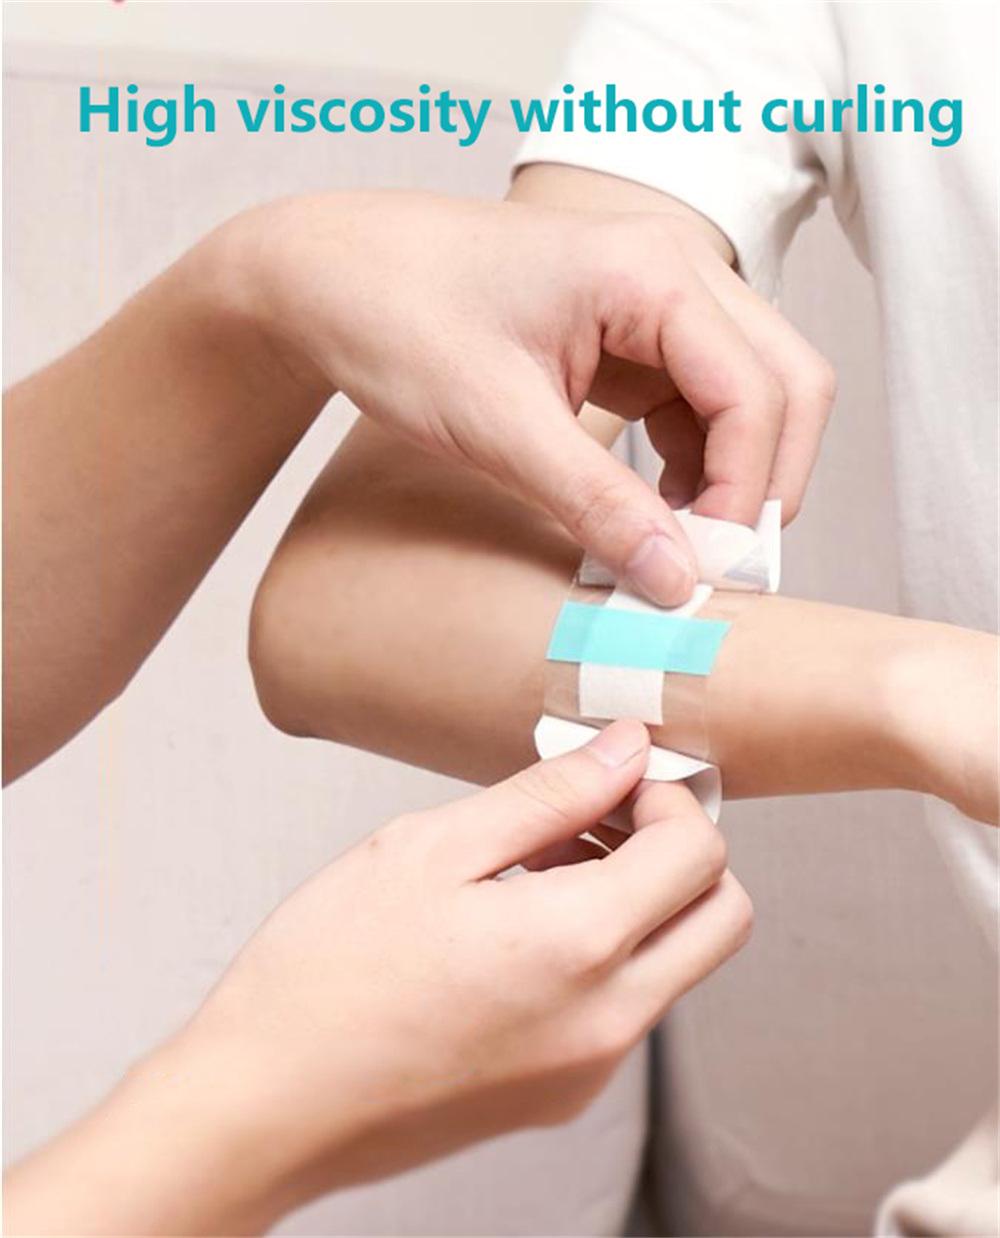 Transparent Film Dressing, Waterproof Wound Cover Bandage Tape, Scar Therapy, Breathable Pressure Seal, Tattoo Dressings